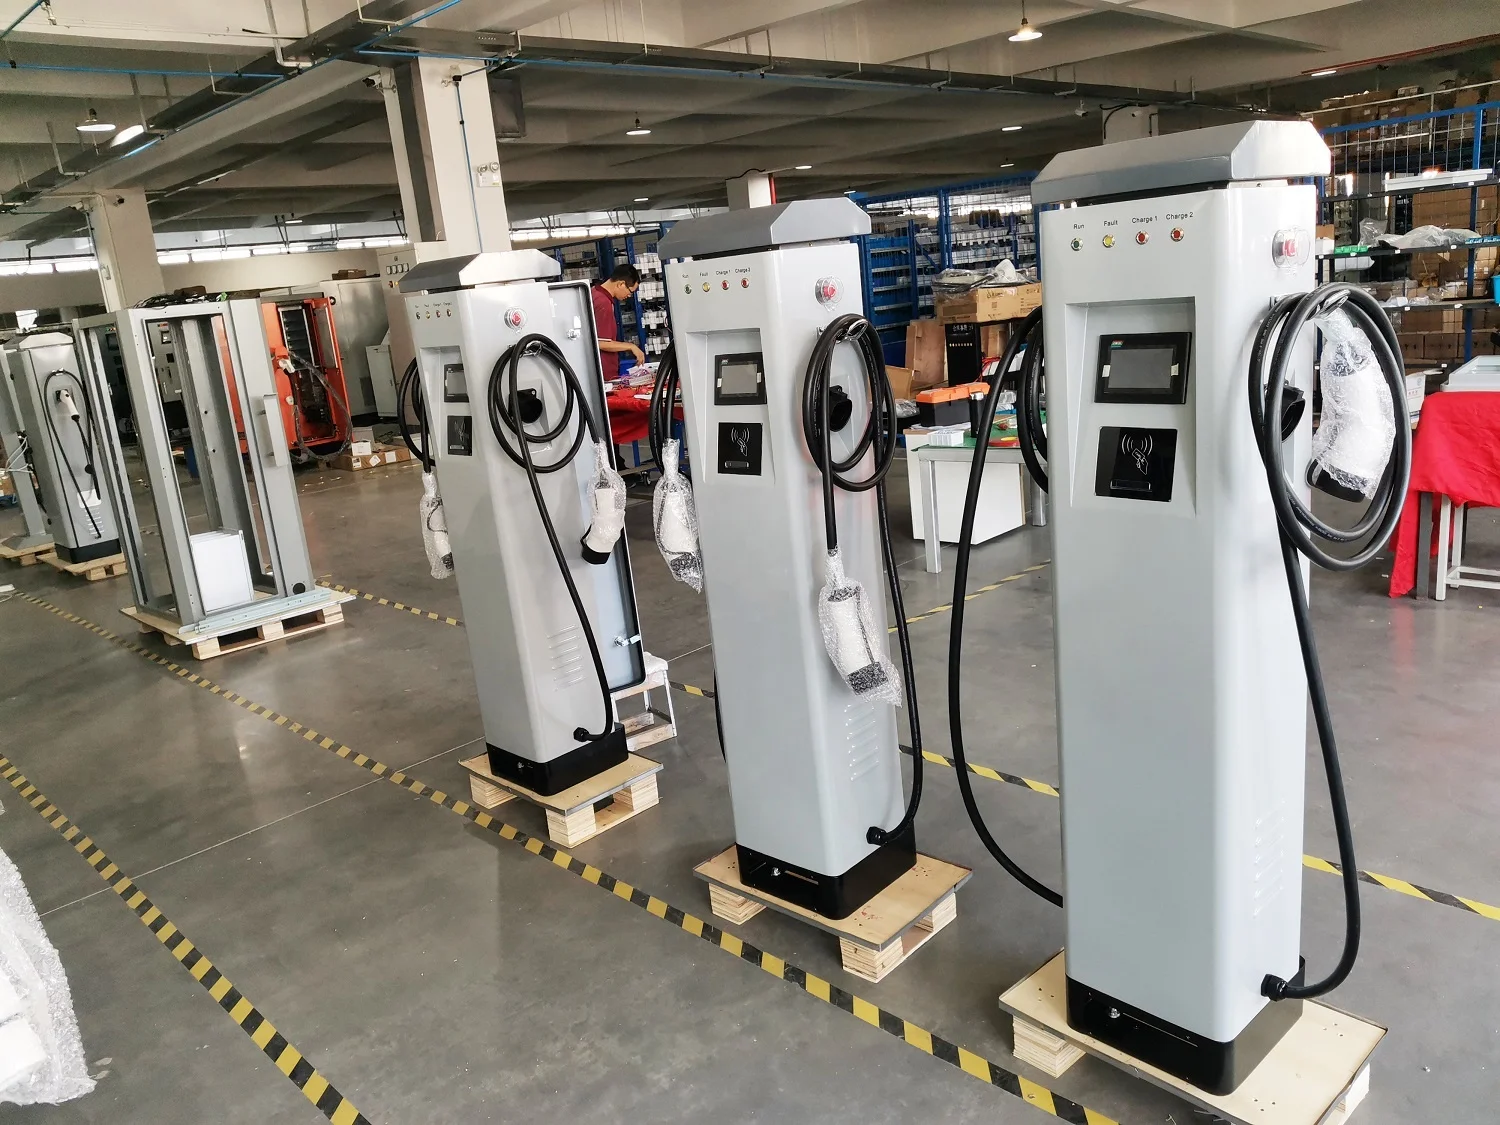 
44kw AC EV charger home version electric car charging electric charger car station ev charge with two 22KW Type 2 ev charger 